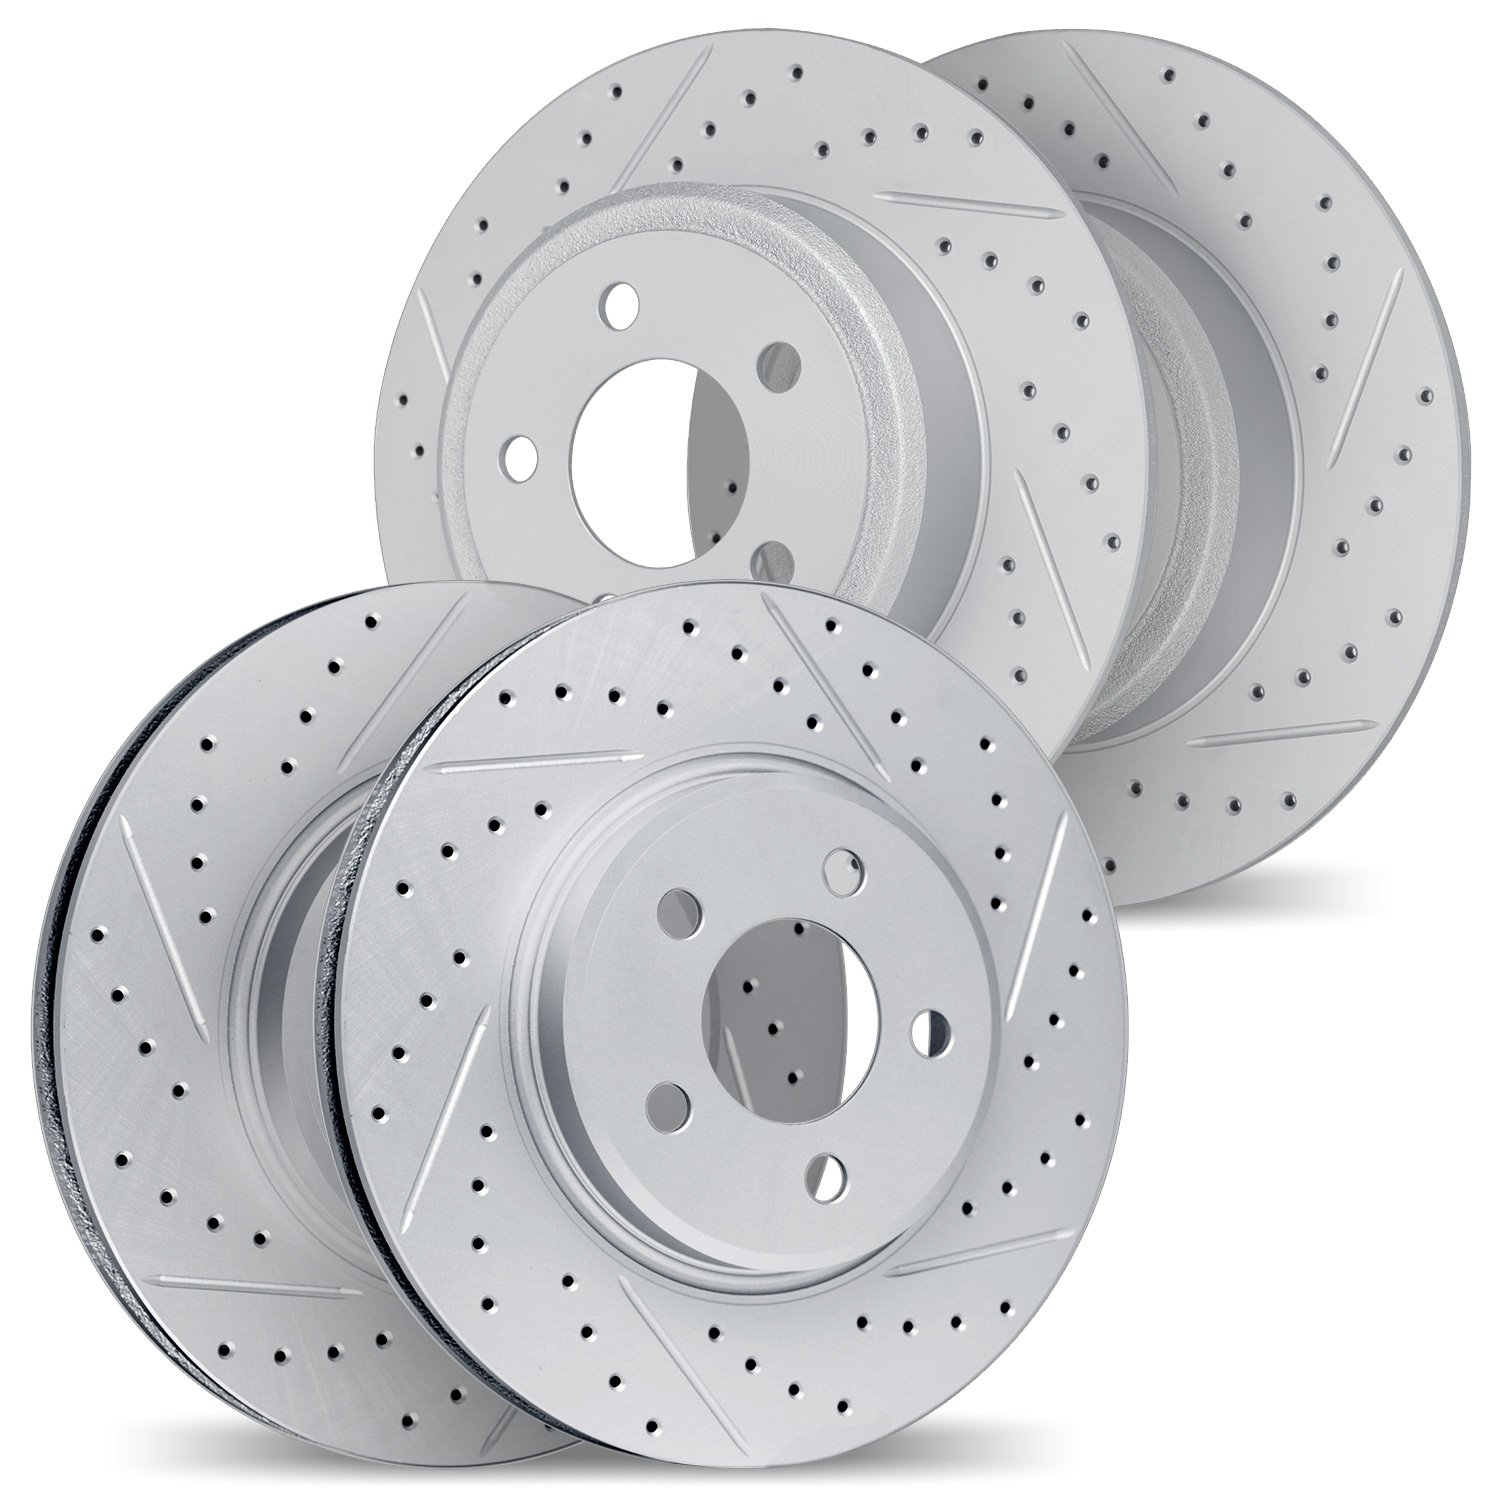 2004-58010 Geoperformance Drilled/Slotted Brake Rotors, 2014-2020 Acura/Honda, Position: Front and Rear